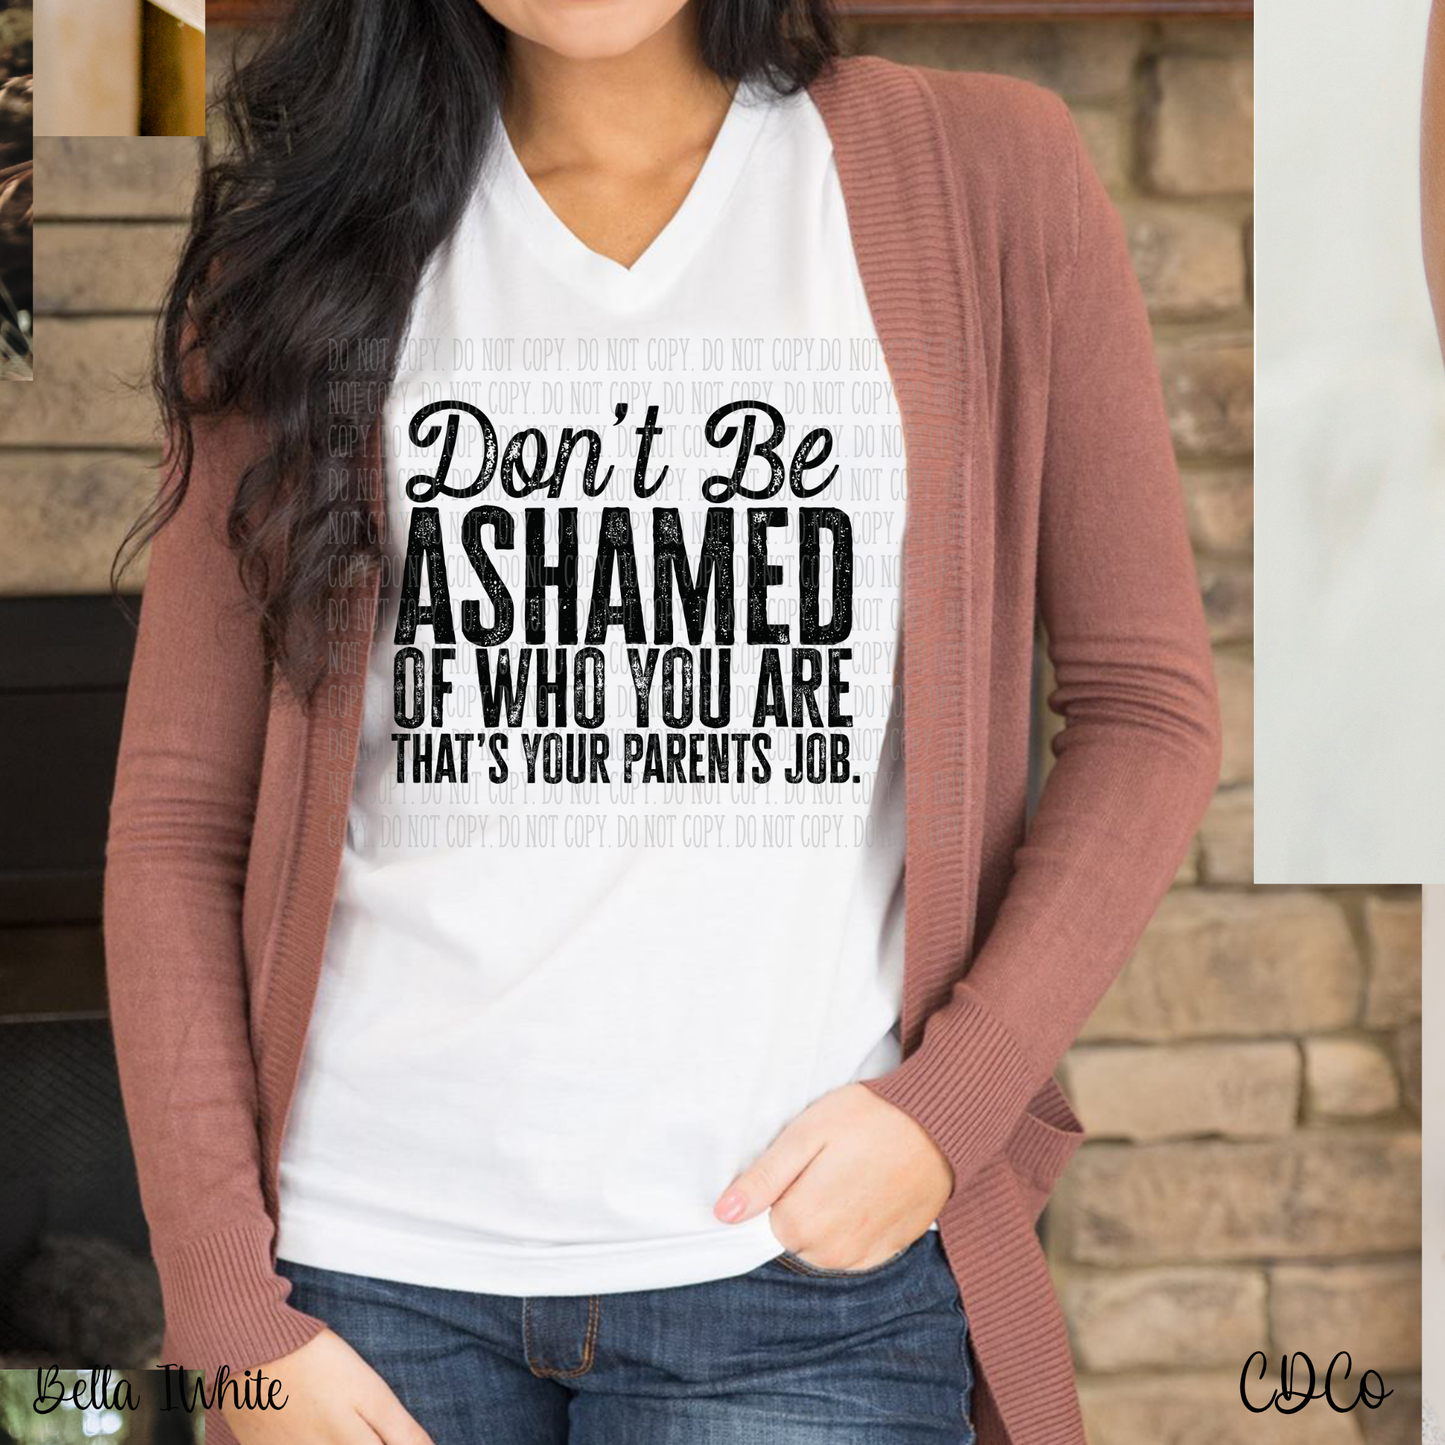 Don't Be Ashamed of Who You Are.  That's Your Parents Job. (325°)